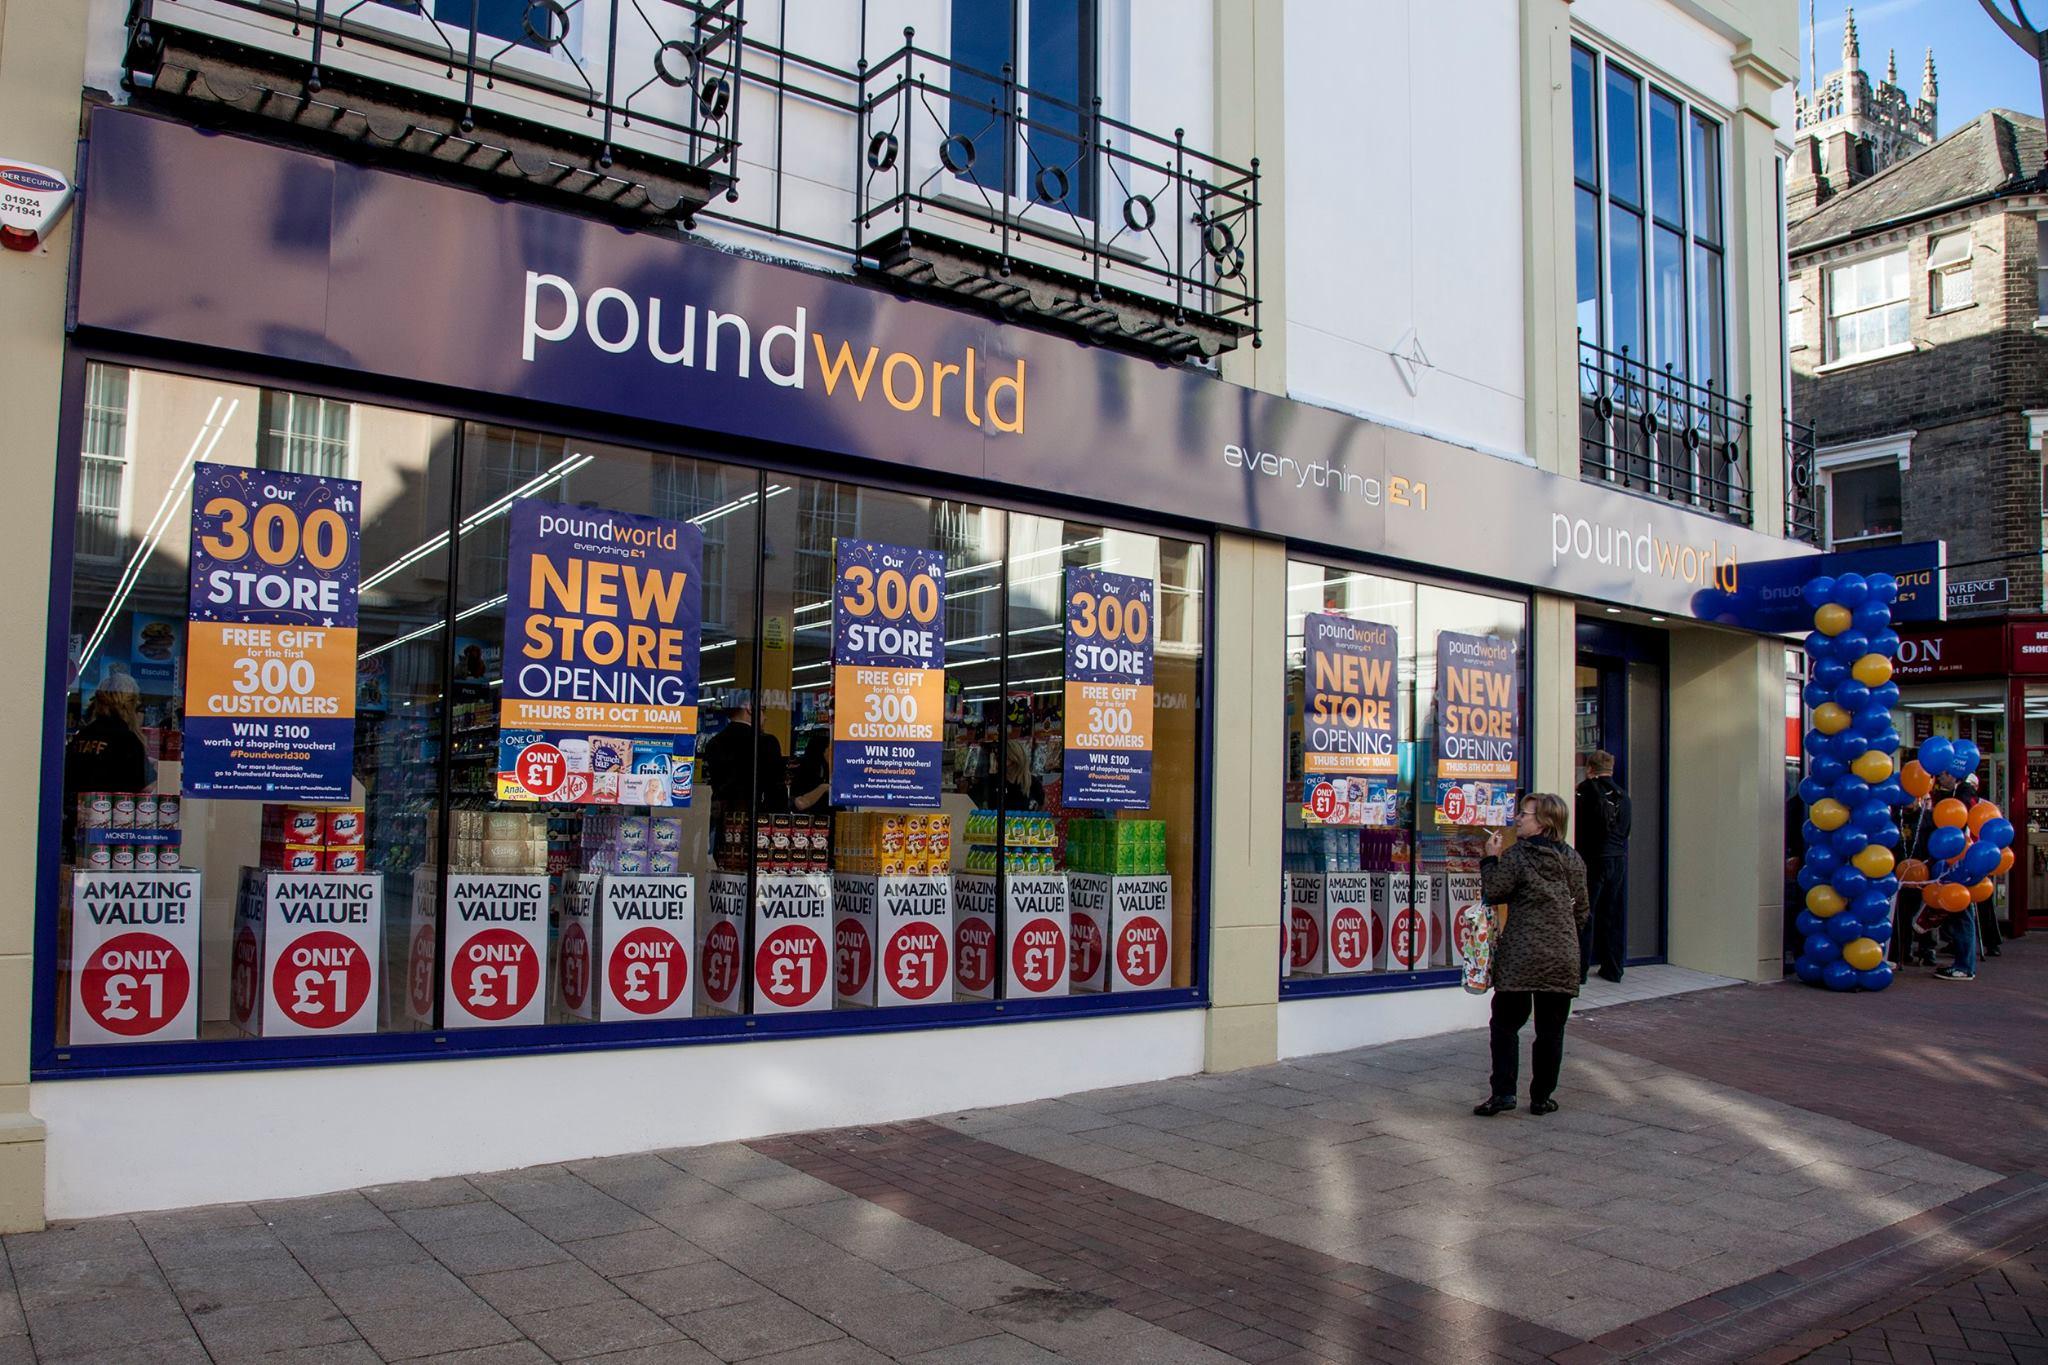 The pound shop chain has appointed partners from Deloitte as administrators